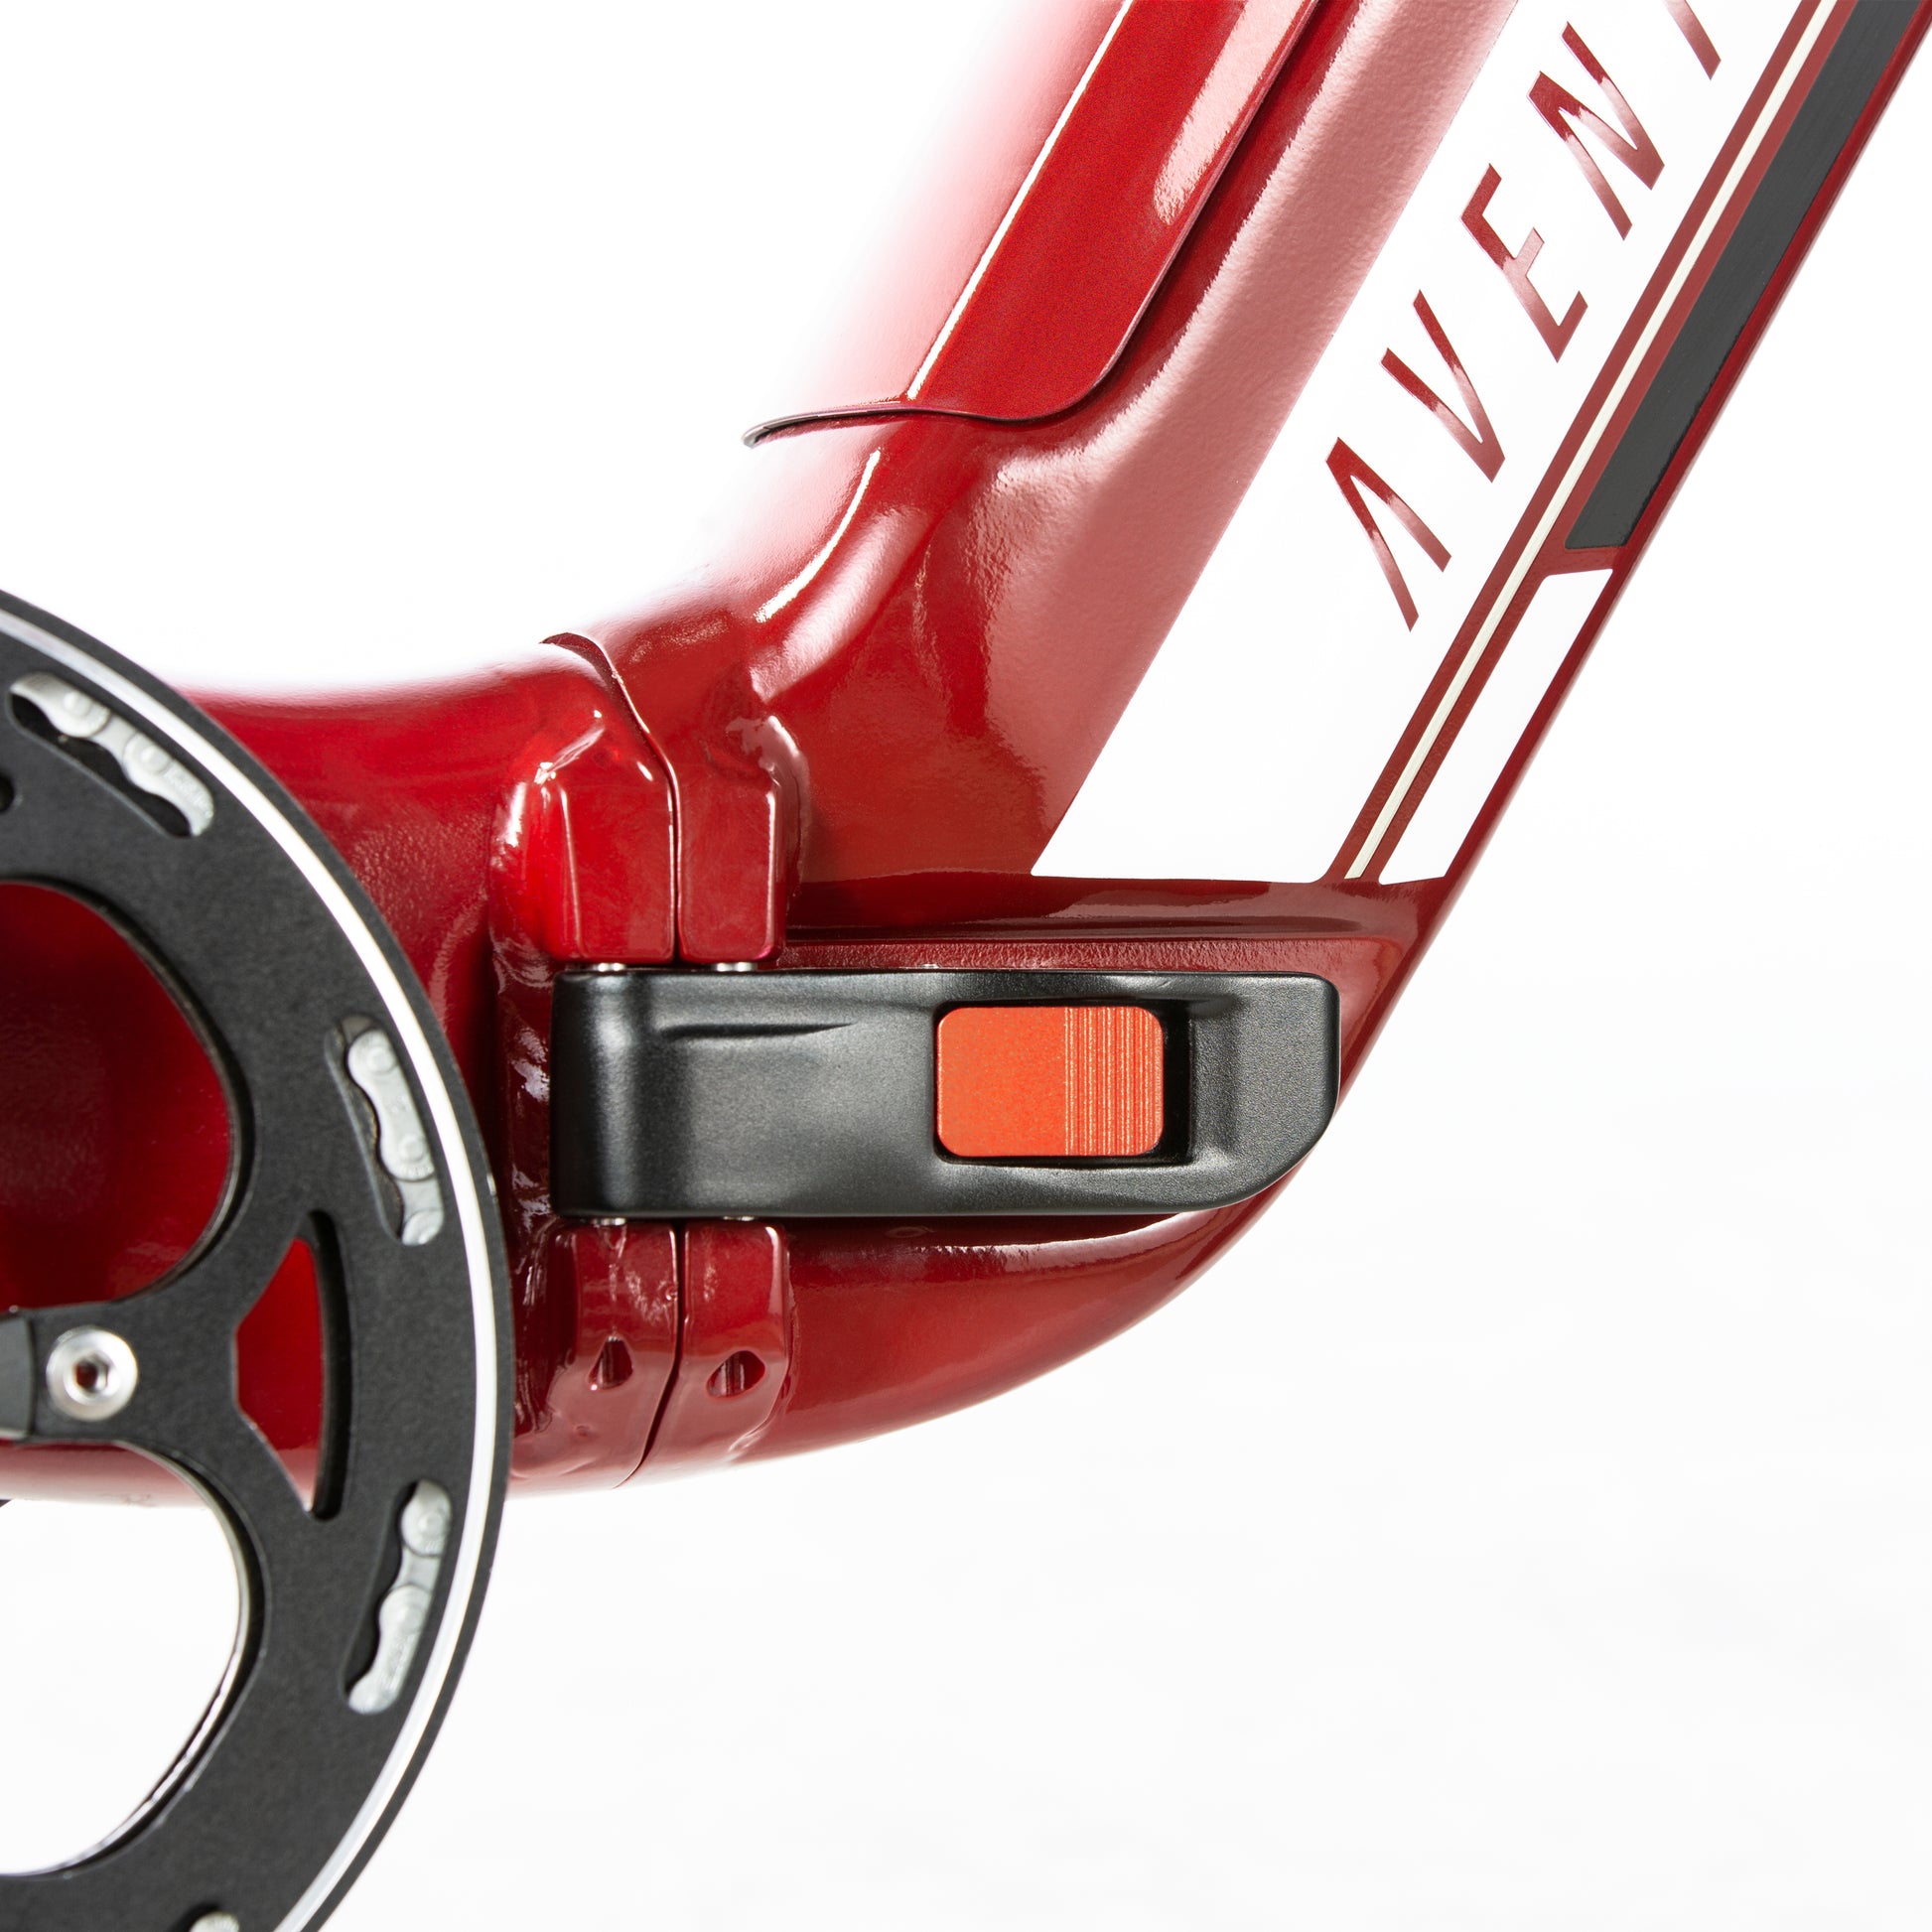 A close up of a red Aventon Sinch electric bike with a black handlebar.